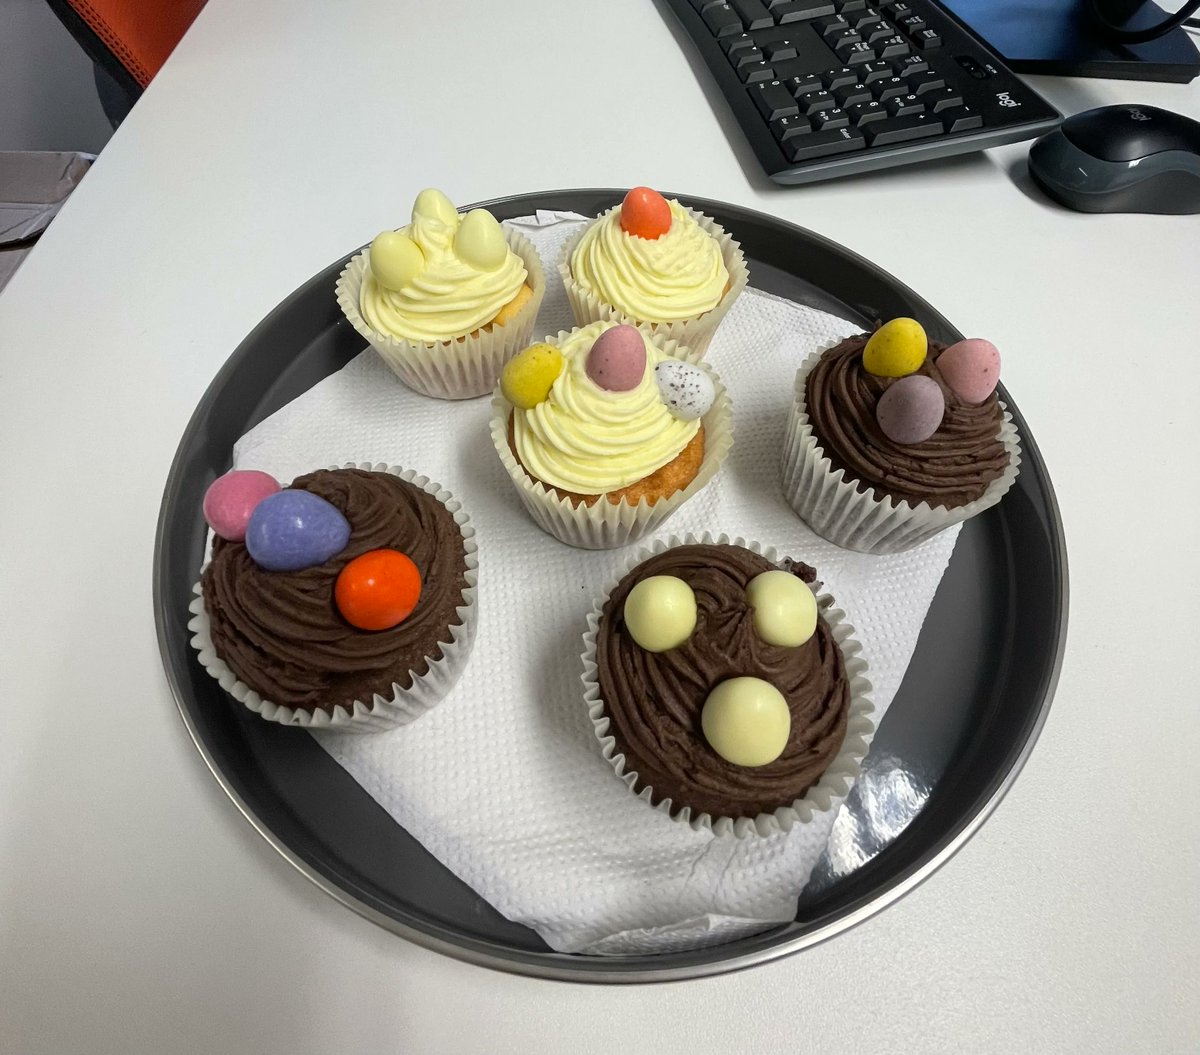 Hello #UKBizLunch!
We're excited to tuck into these Easter cupcakes our wonderful consultant Sian has made for us! 😍
What's your go-to office snack?